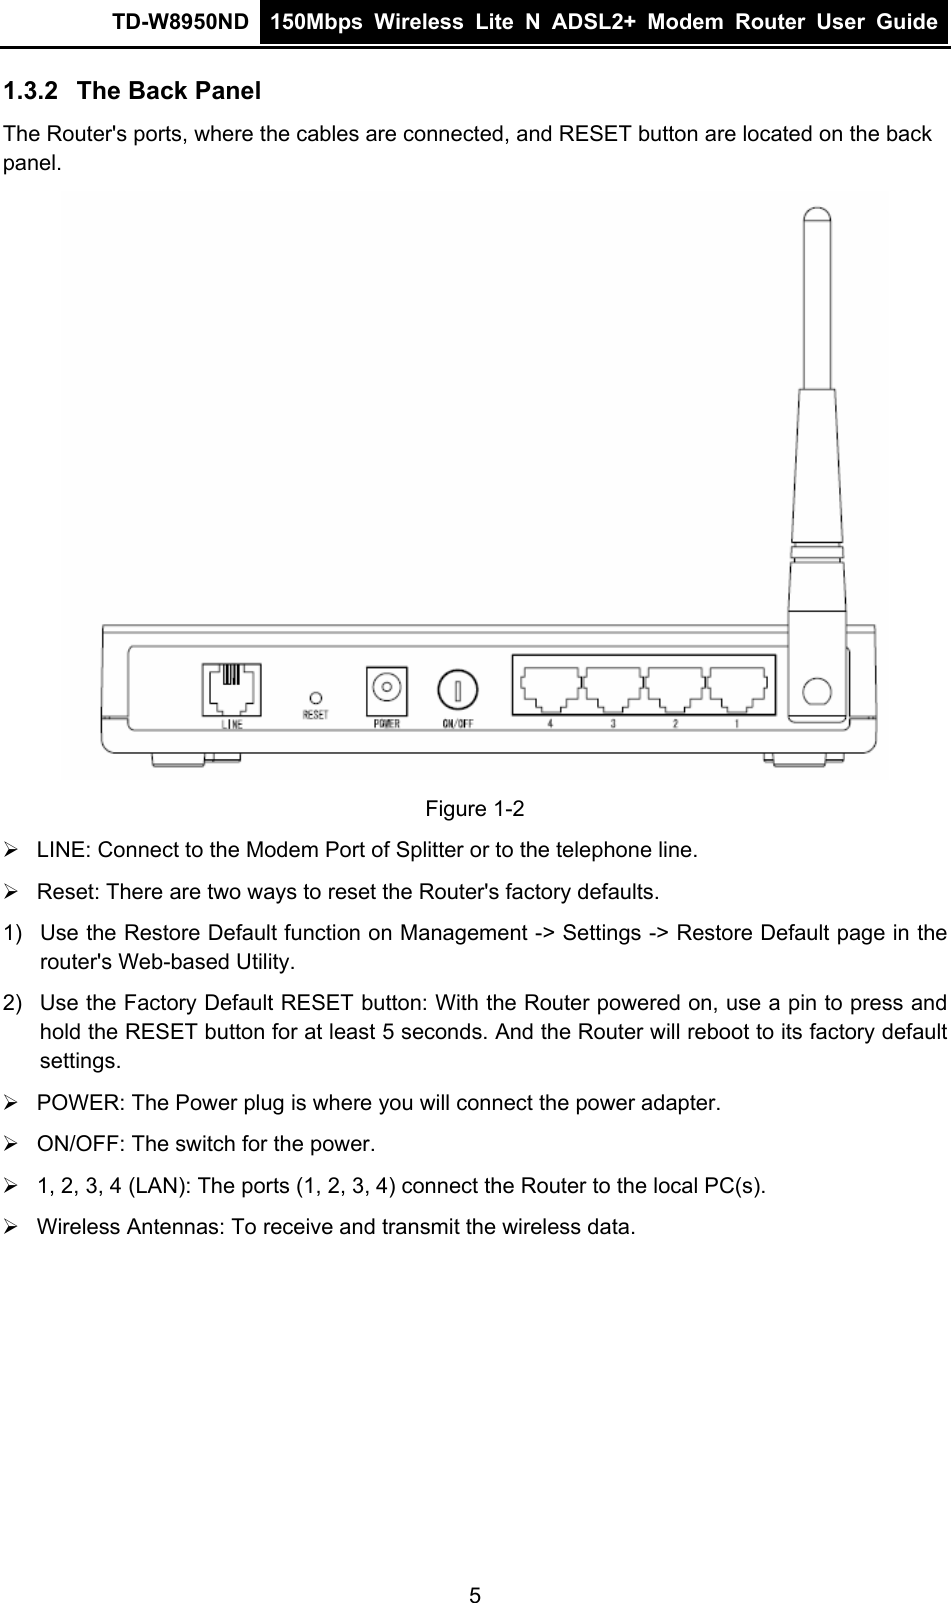 TD-W8950ND  150Mbps Wireless Lite N ADSL2+ Modem Router User Guide  1.3.2  The Back Panel The Router&apos;s ports, where the cables are connected, and RESET button are located on the back panel.  Figure 1-2 ¾  LINE: Connect to the Modem Port of Splitter or to the telephone line. ¾  Reset: There are two ways to reset the Router&apos;s factory defaults. 1)  Use the Restore Default function on Management -&gt; Settings -&gt; Restore Default page in the router&apos;s Web-based Utility. 2)  Use the Factory Default RESET button: With the Router powered on, use a pin to press and hold the RESET button for at least 5 seconds. And the Router will reboot to its factory default settings. ¾  POWER: The Power plug is where you will connect the power adapter. ¾  ON/OFF: The switch for the power. ¾  1, 2, 3, 4 (LAN): The ports (1, 2, 3, 4) connect the Router to the local PC(s). ¾  Wireless Antennas: To receive and transmit the wireless data. 5 